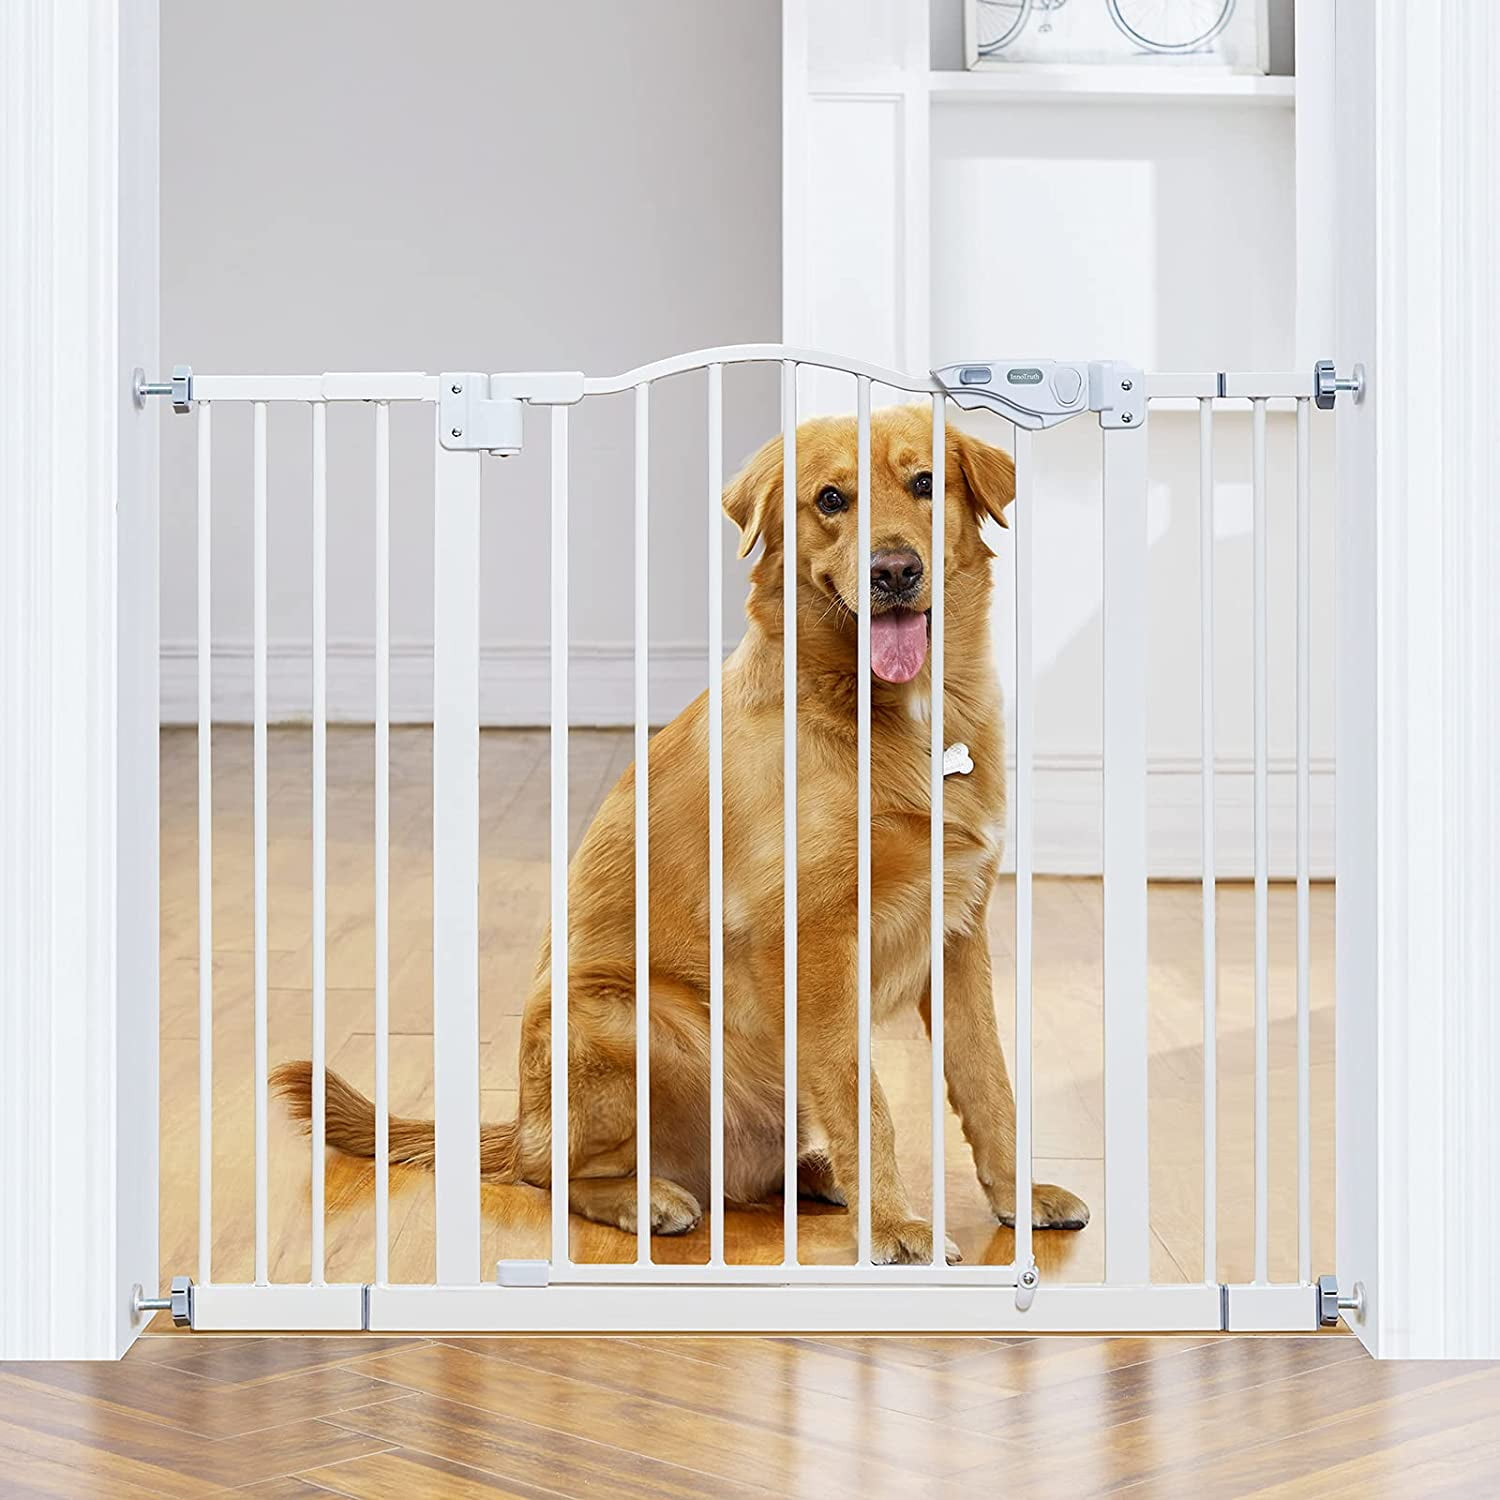 Fits Openings 29.5-40.5 Durable Easy Walk Thru Puppy Fences Dog Gate Auto Close Safety Gate 40.5 inch Extra Wide Pet Gates for House Doorway and Stairs Includes 2.75 and 5.25 Extension